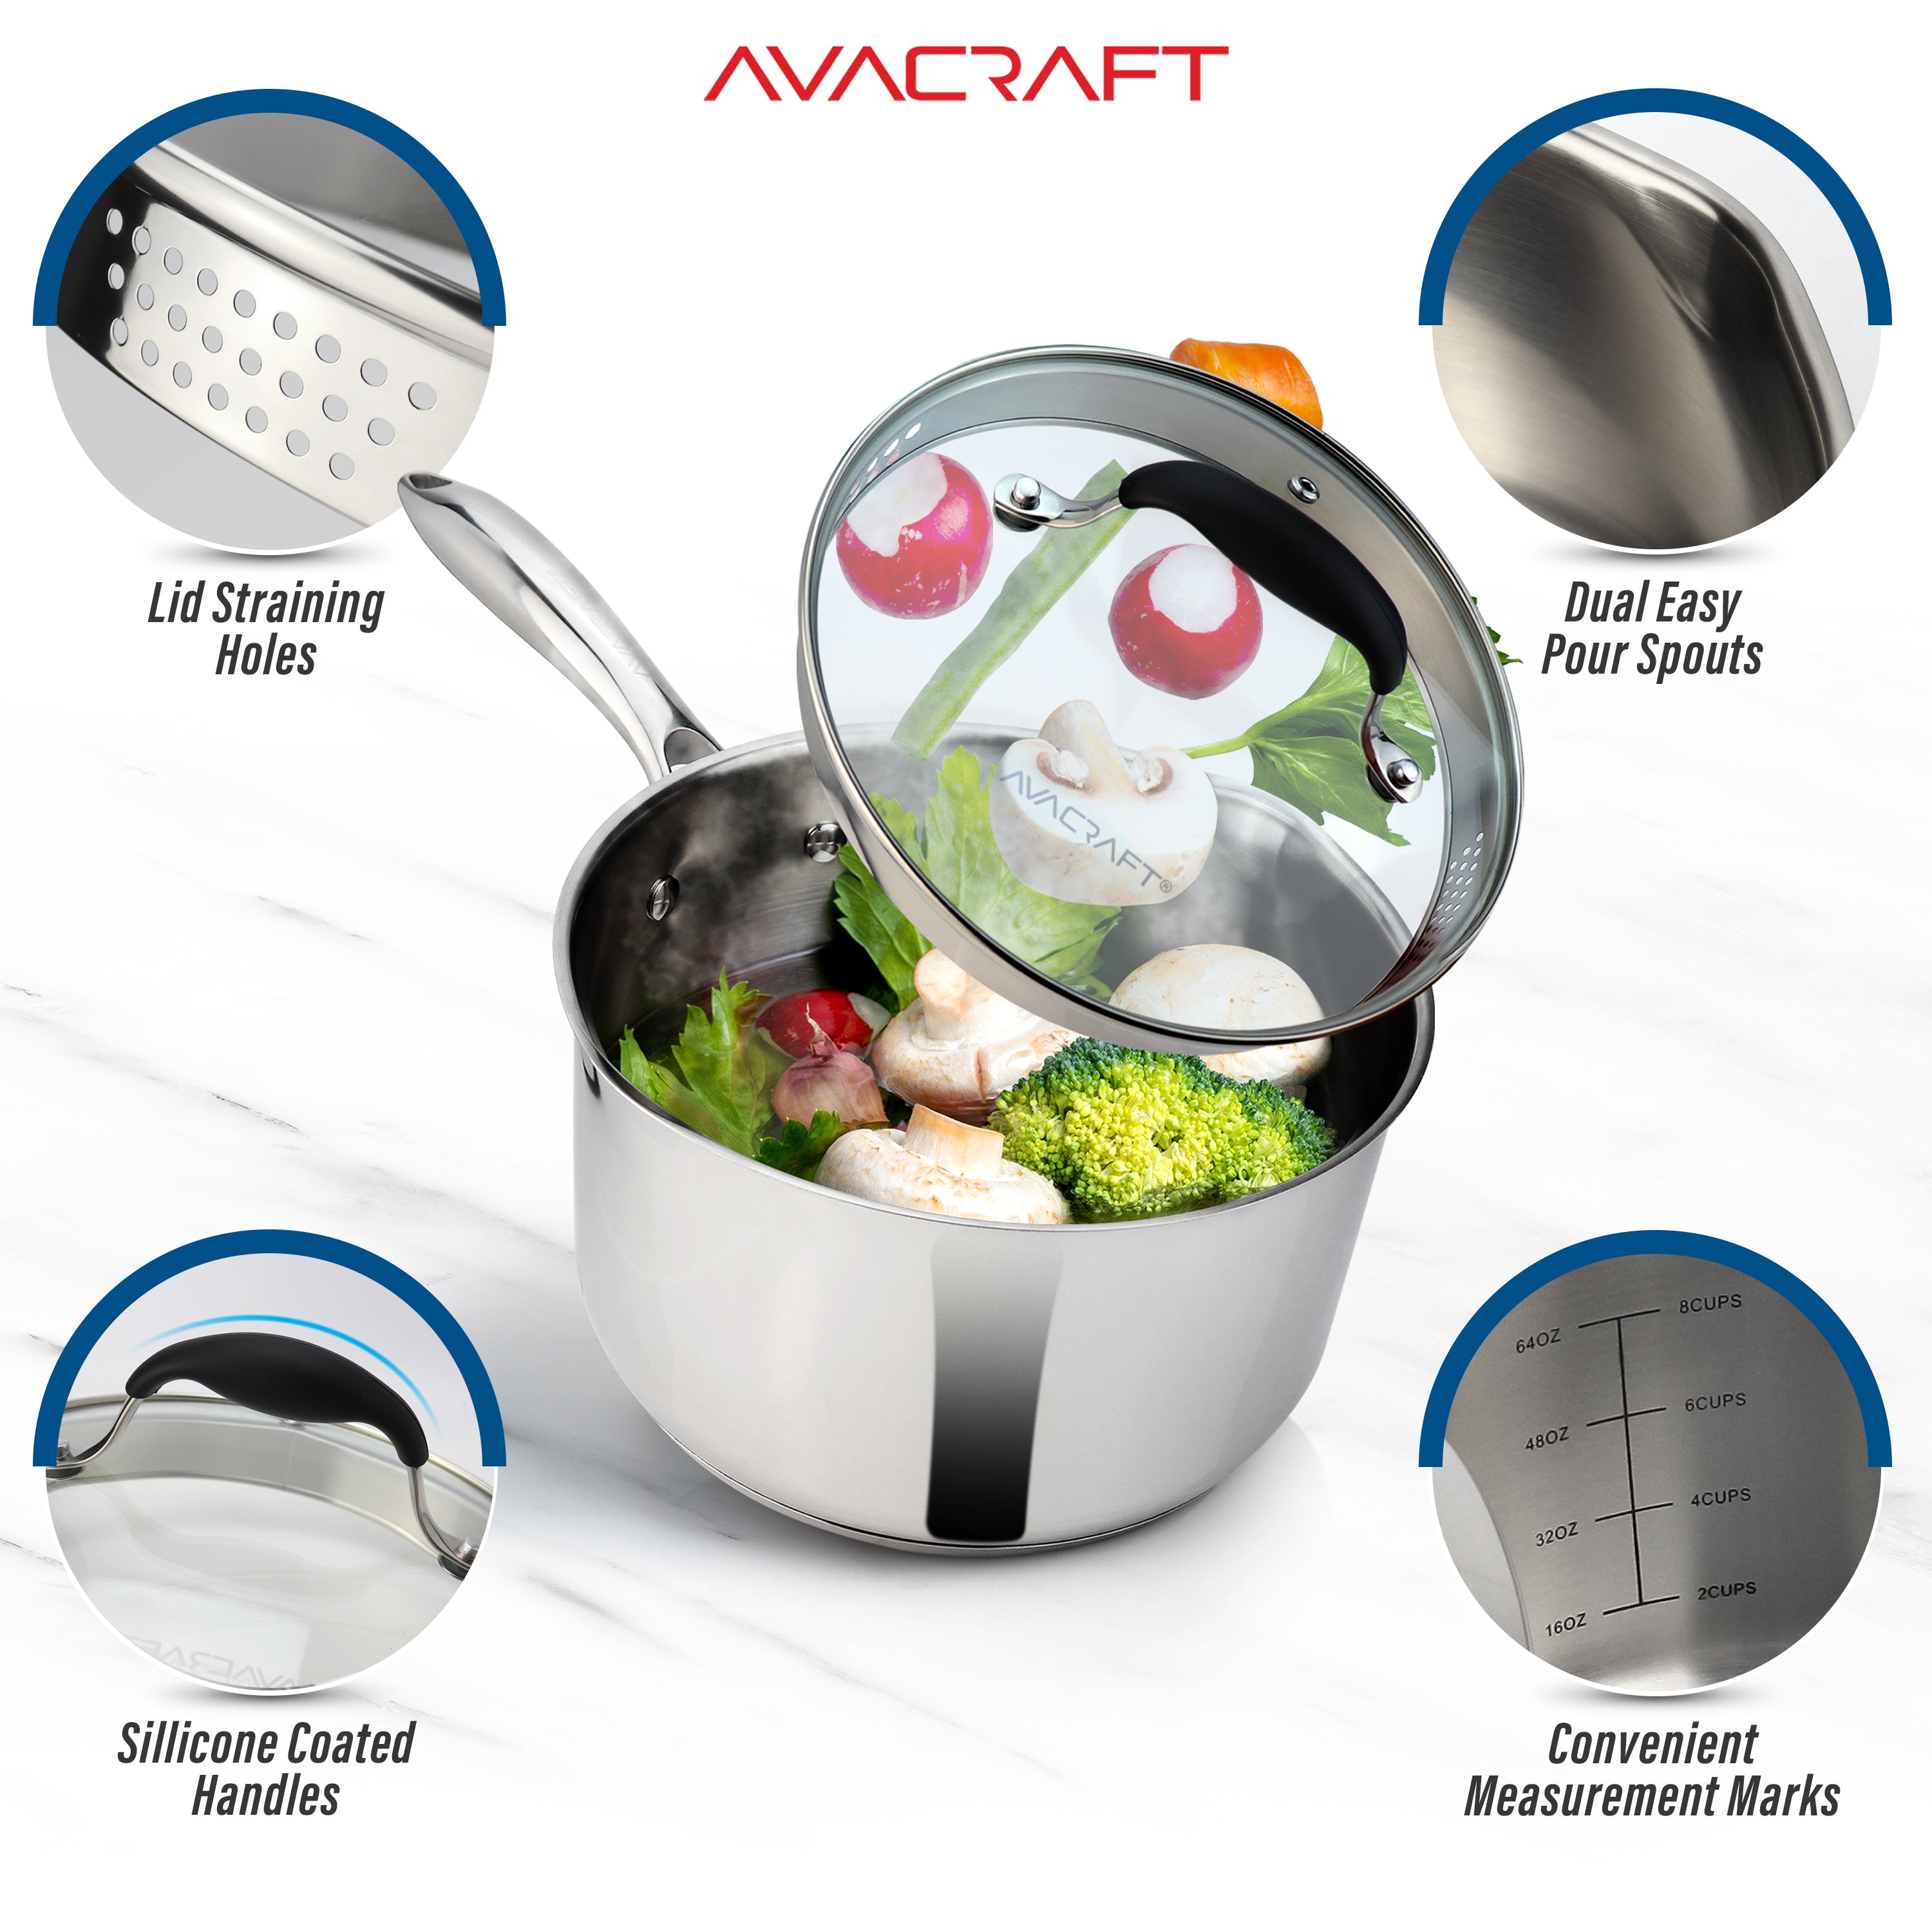 AVACRAFT Top Rated Stainless Steel Stockpot with Glass Strainer Lid, 6